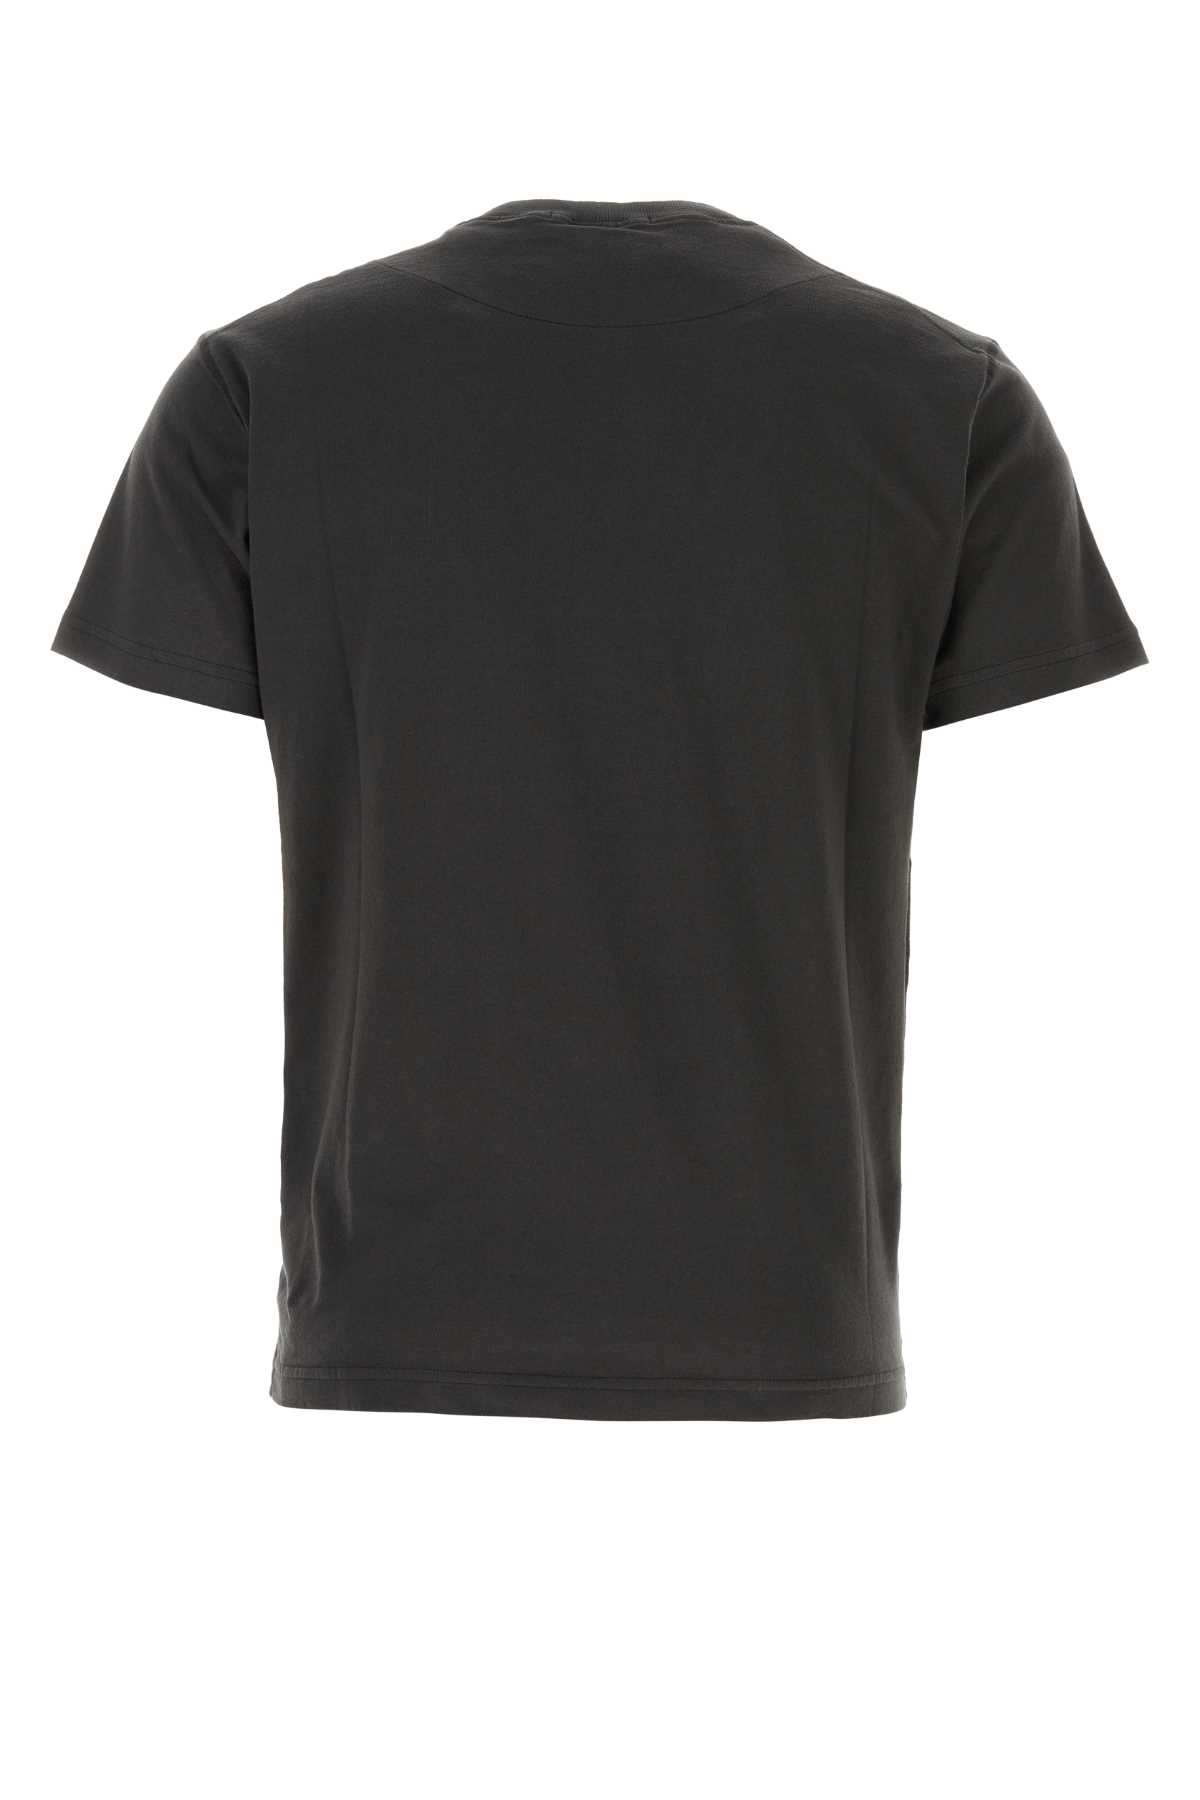 Stone Island Anthracite Cotton T-shirt In Charchoal